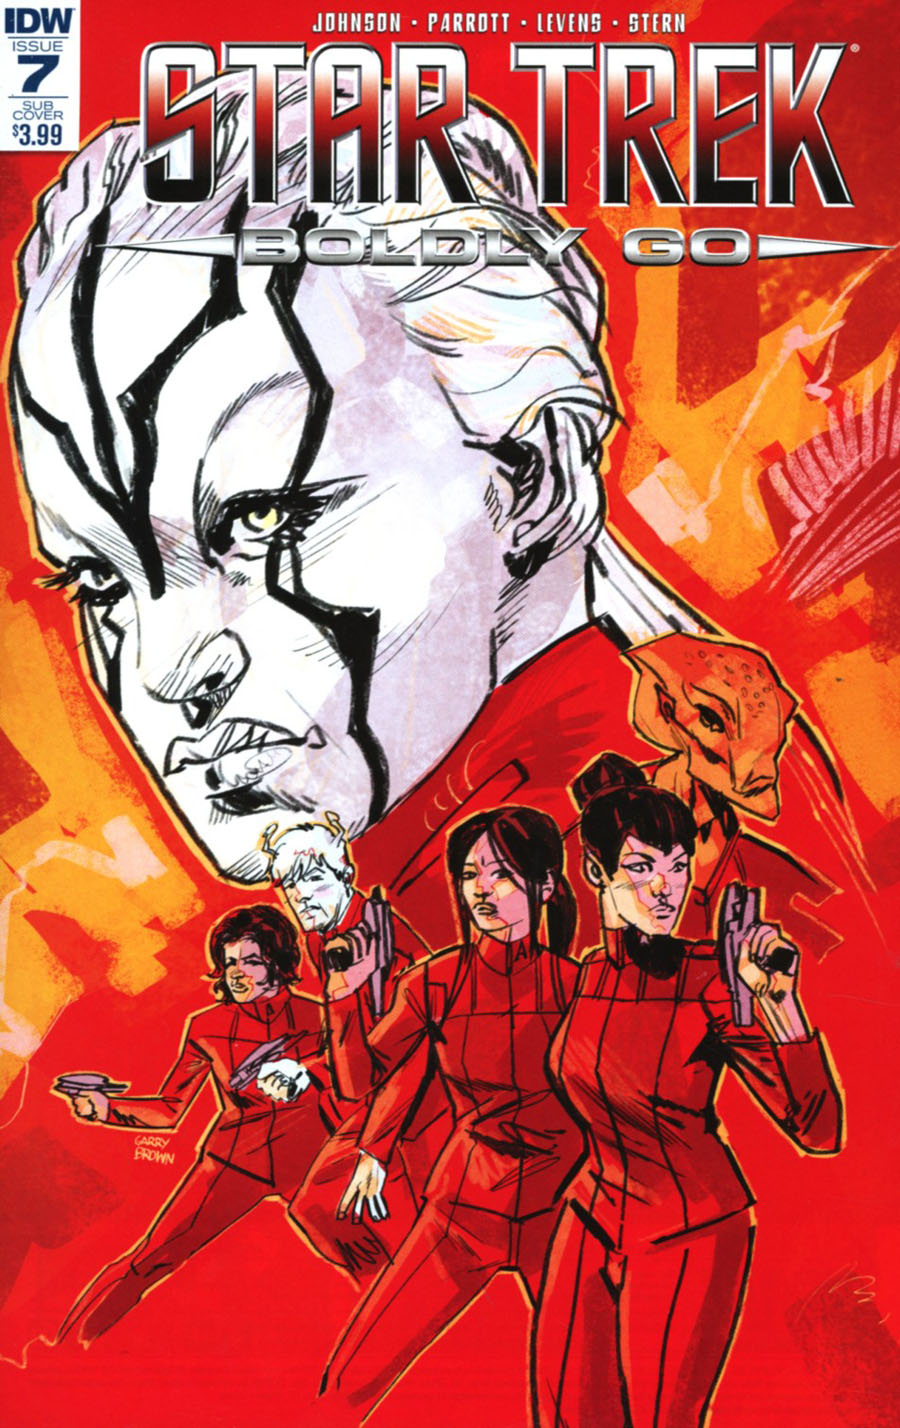 Star Trek Boldly Go #7 Cover B Variant Gerry Brown Subscription Cover